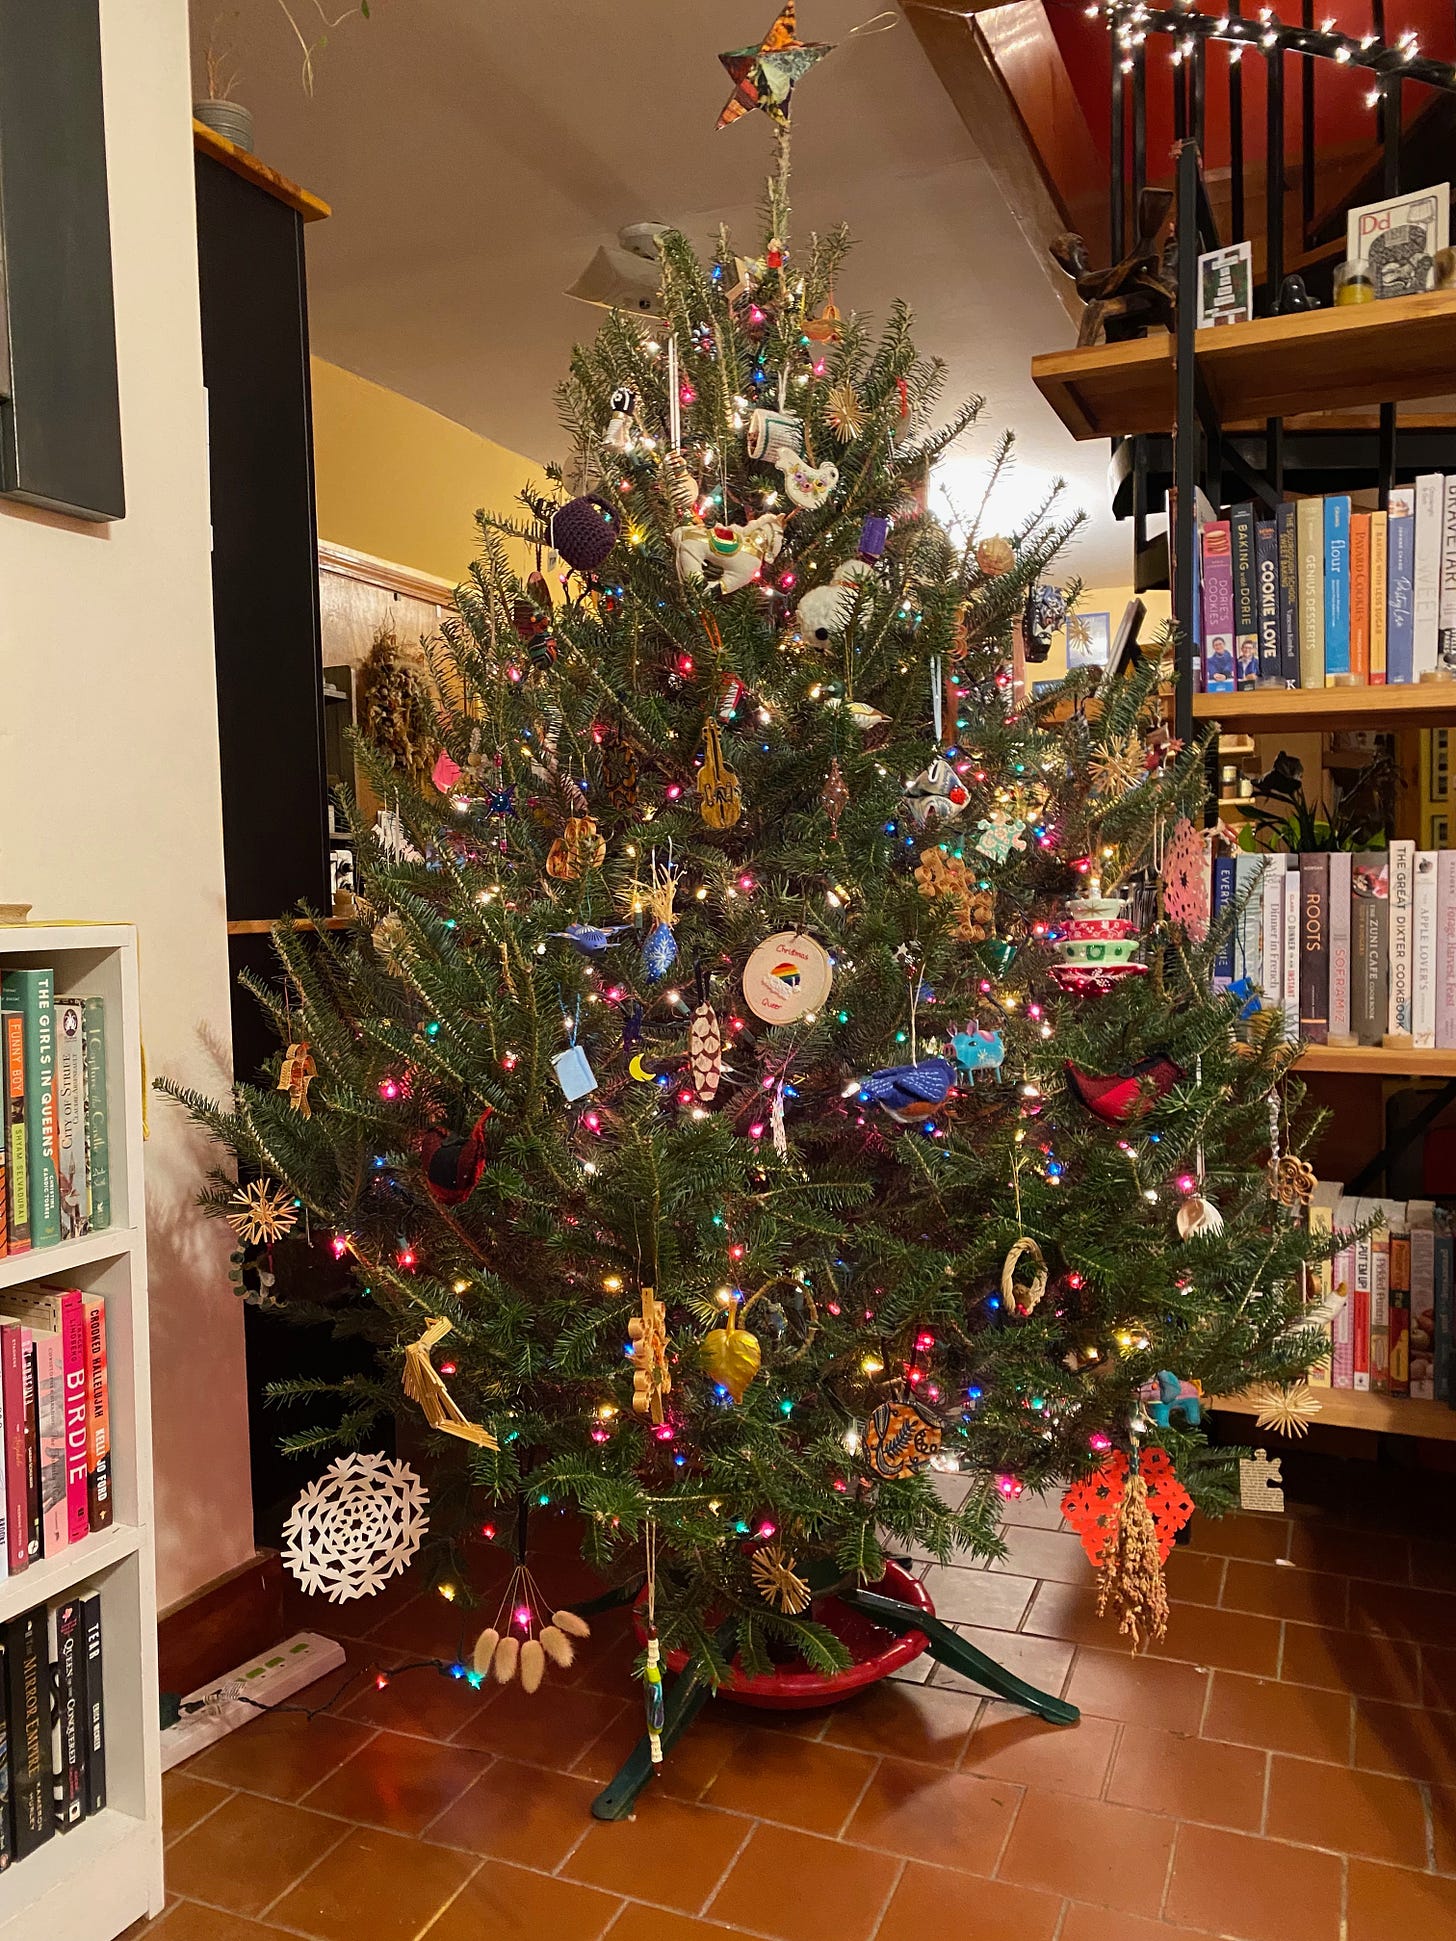 A Christmas tree full of colored lights and ornaments stands between two bookshelves.